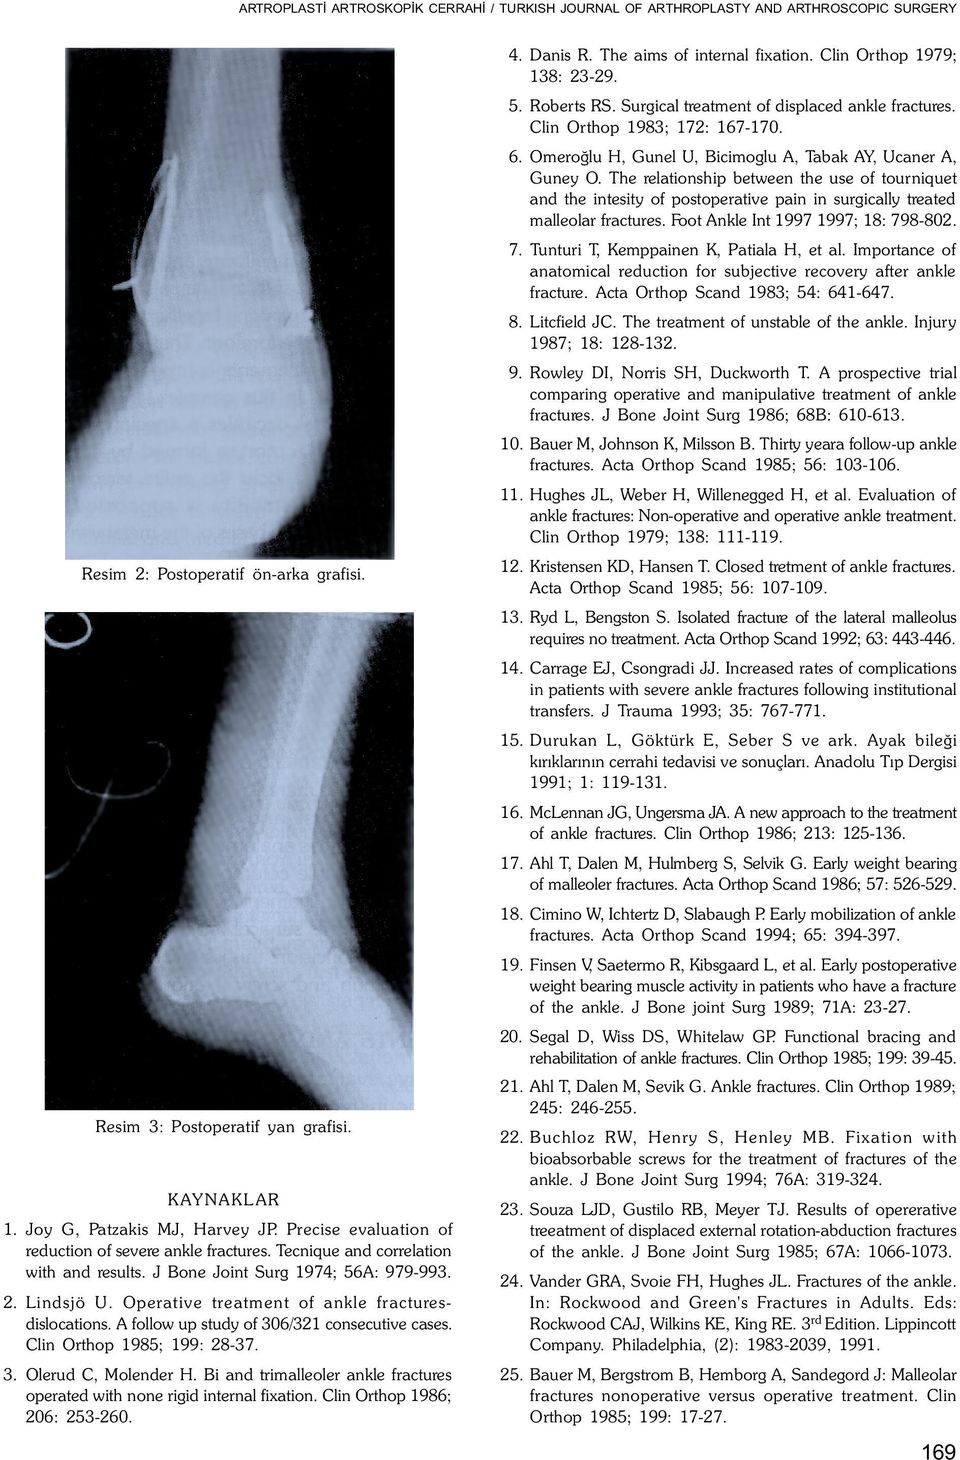 Clin Orthop 1985; 199: 28-37. 3. Olerud C, Molender H. Bi and trimalleoler ankle fractures operated with none rigid internal fixation. Clin Orthop 1986; 206: 253-260. 4. Danis R.